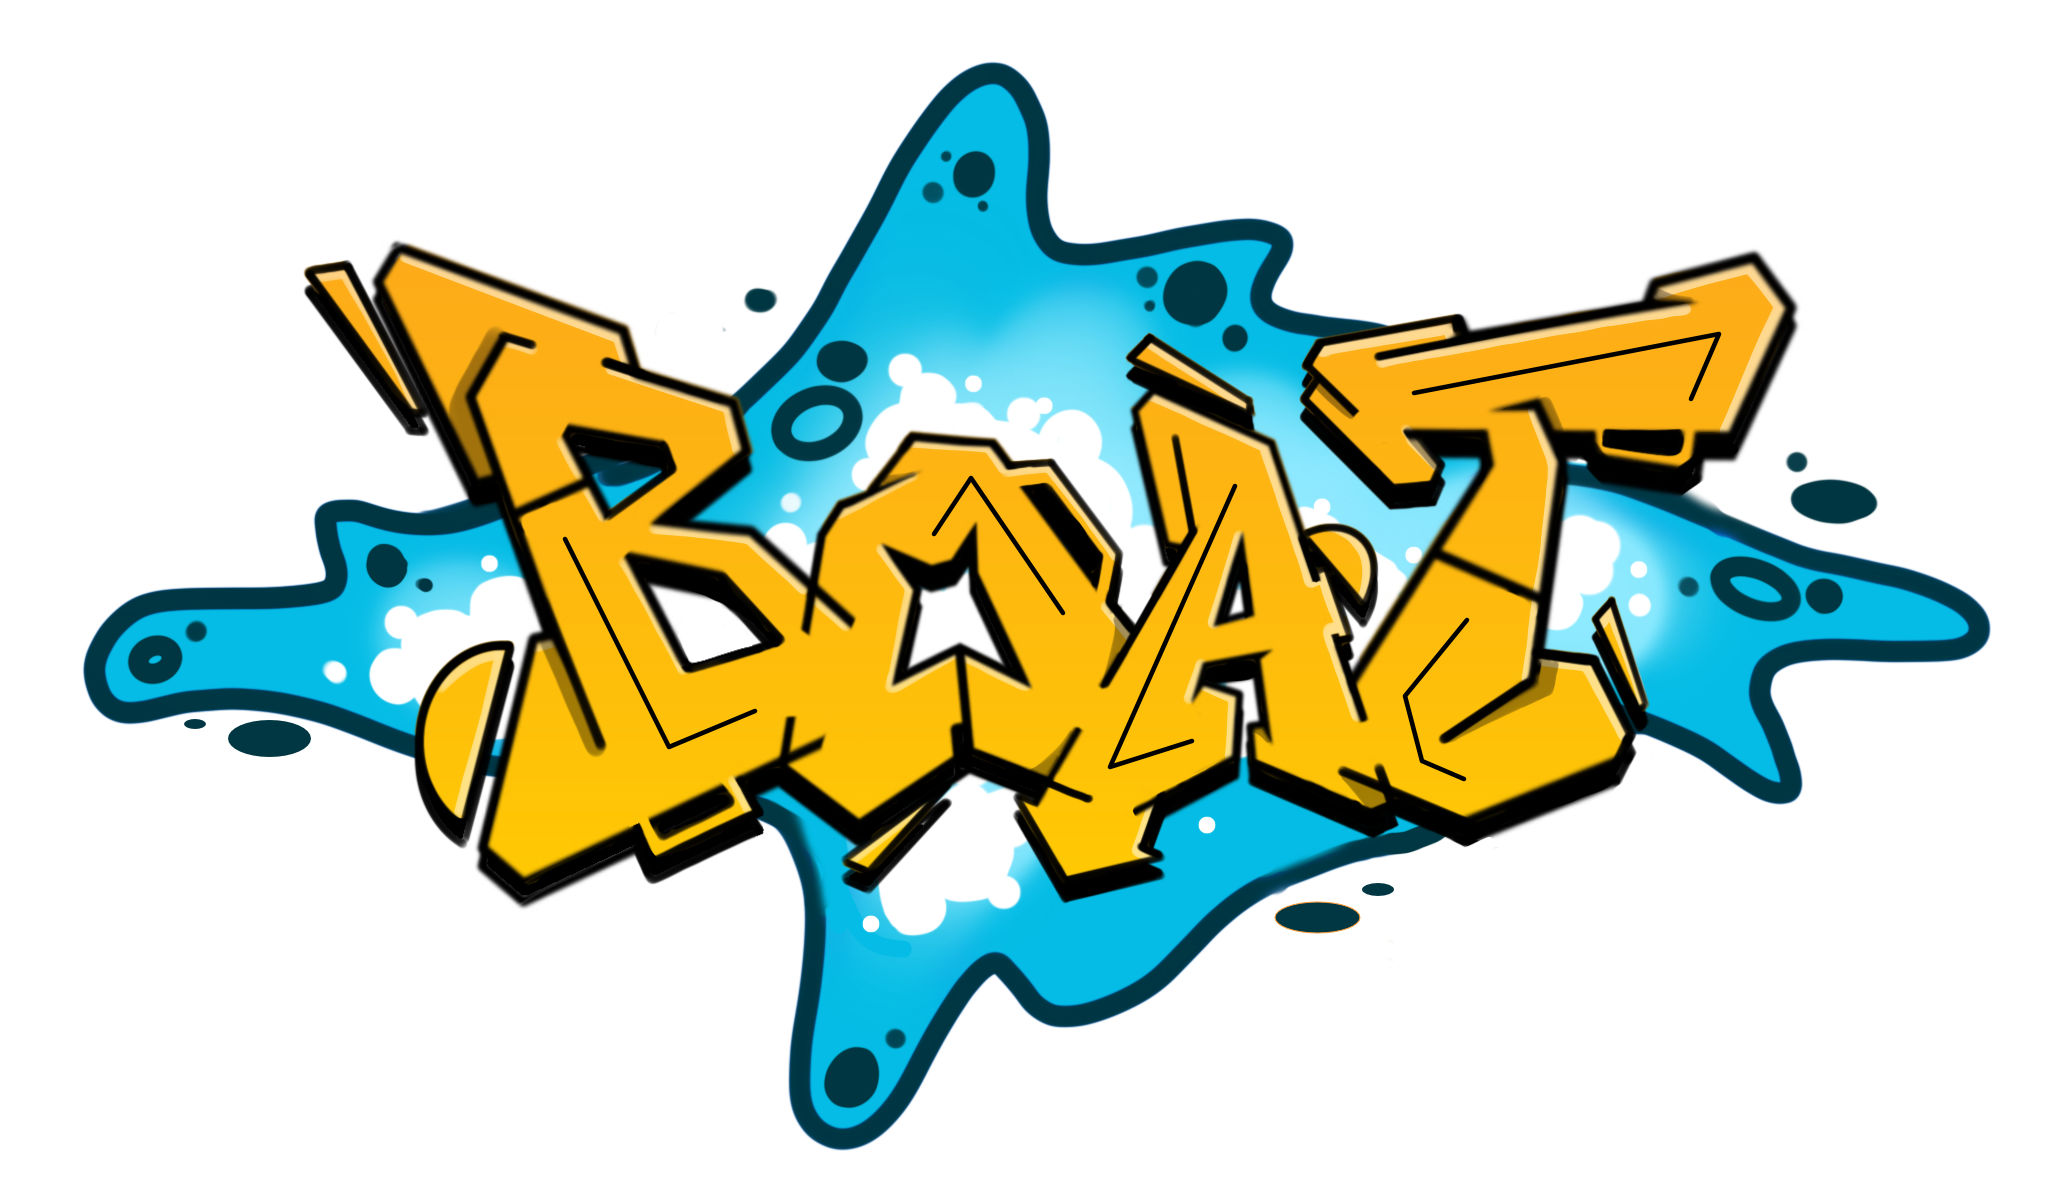 How to Draw “Boat” in Graffiti in 13 Steps